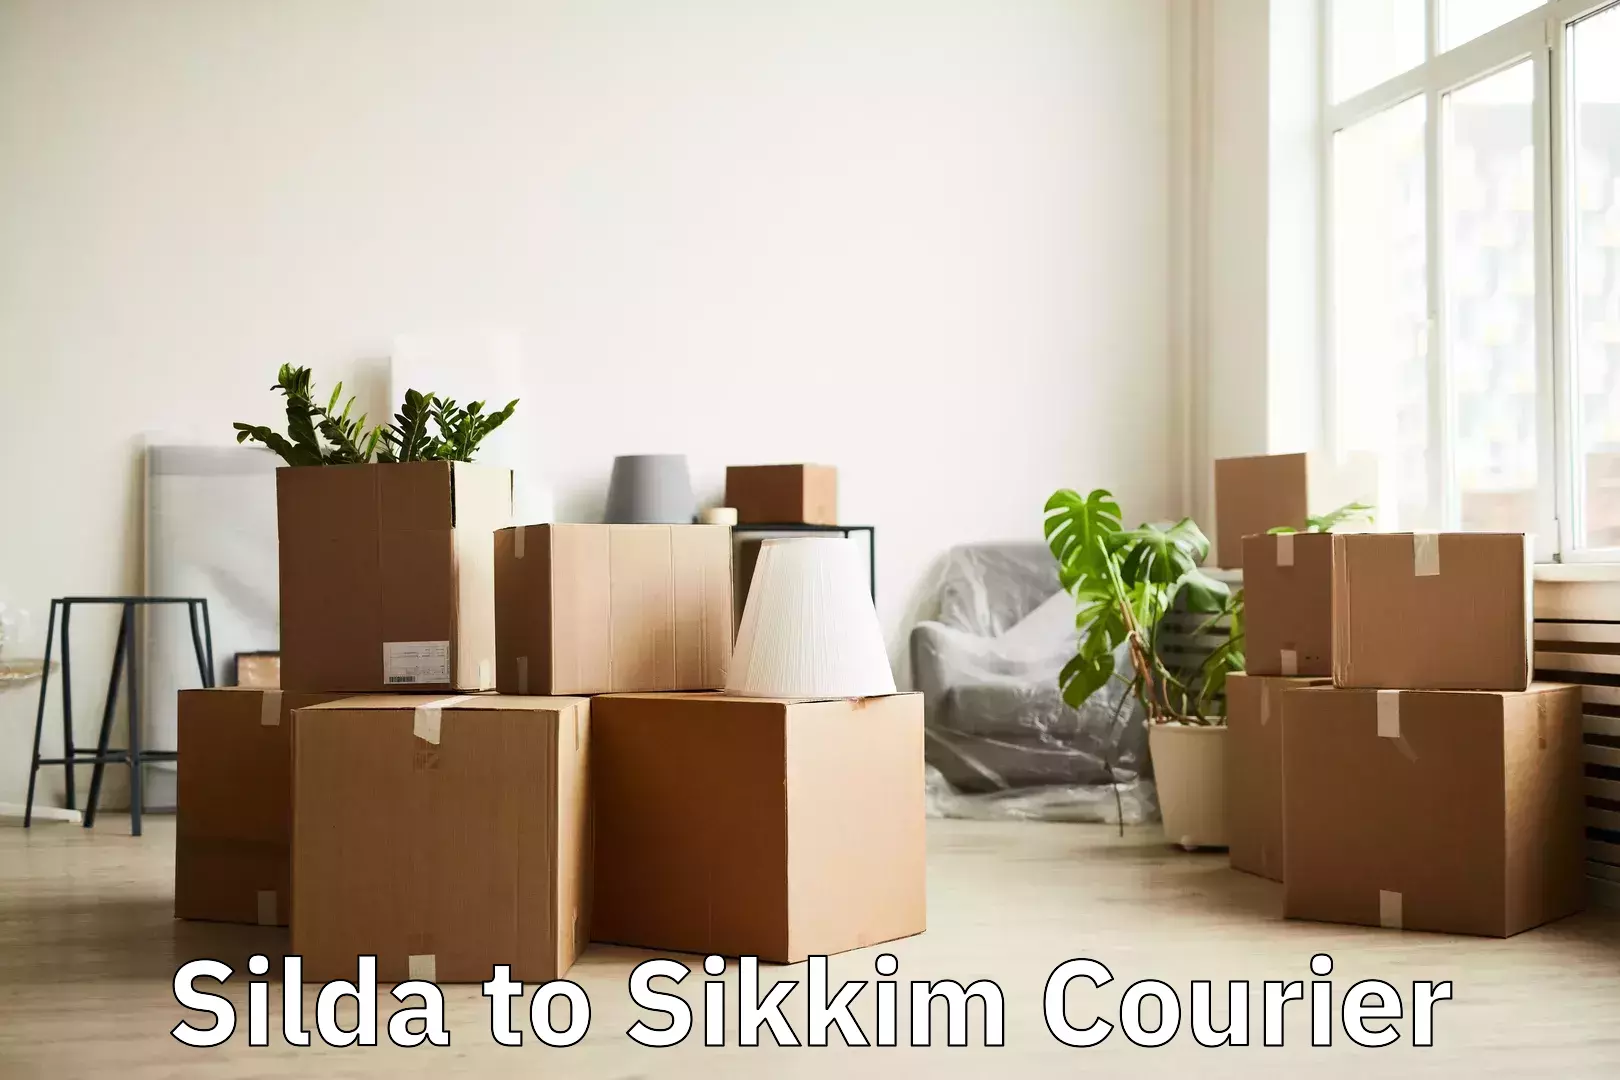 Hassle-free luggage shipping Silda to North Sikkim